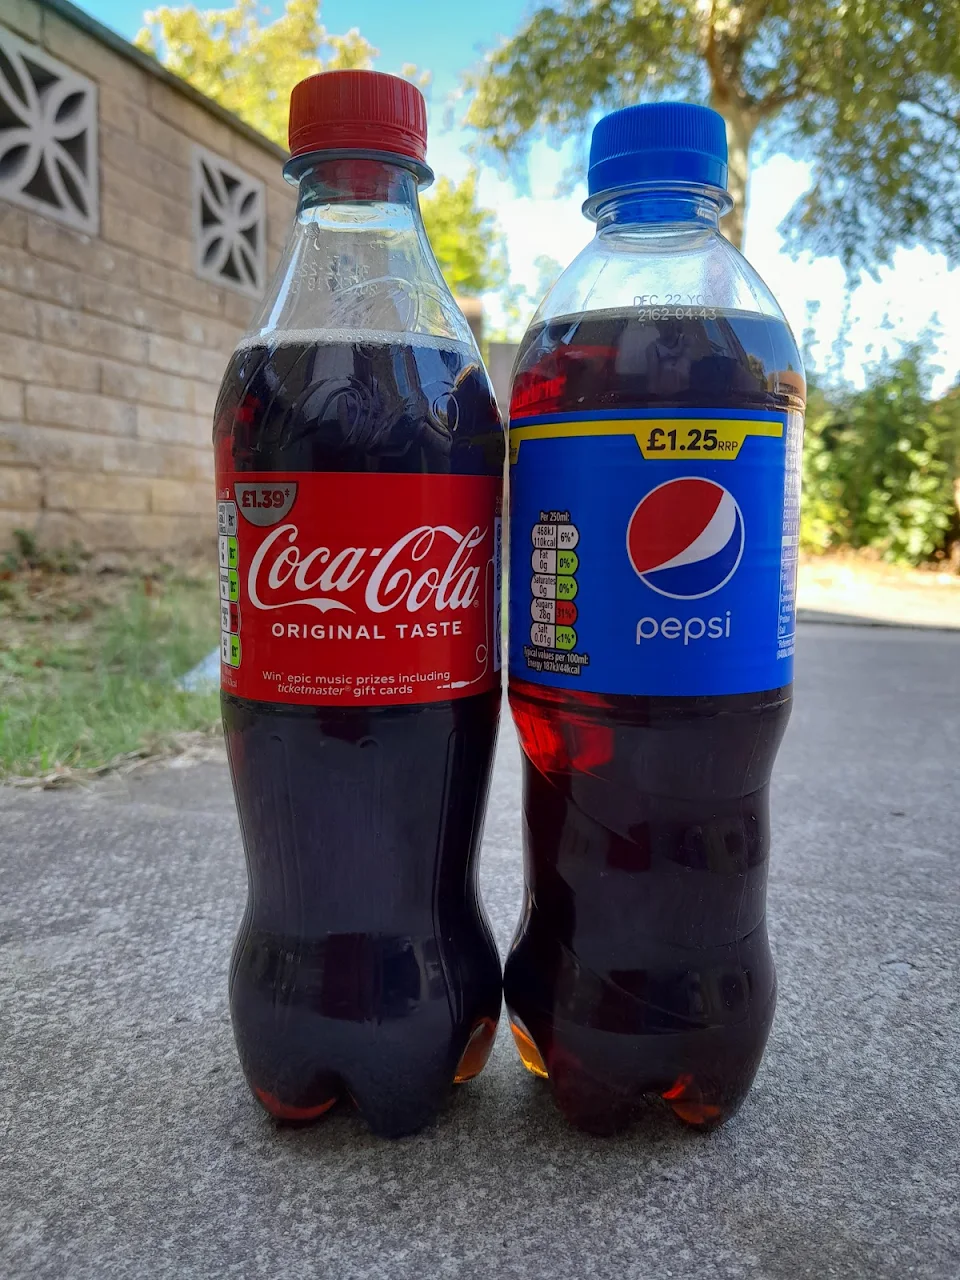 Let's settle this debate once and for all. what's better Coke or Pepsi?